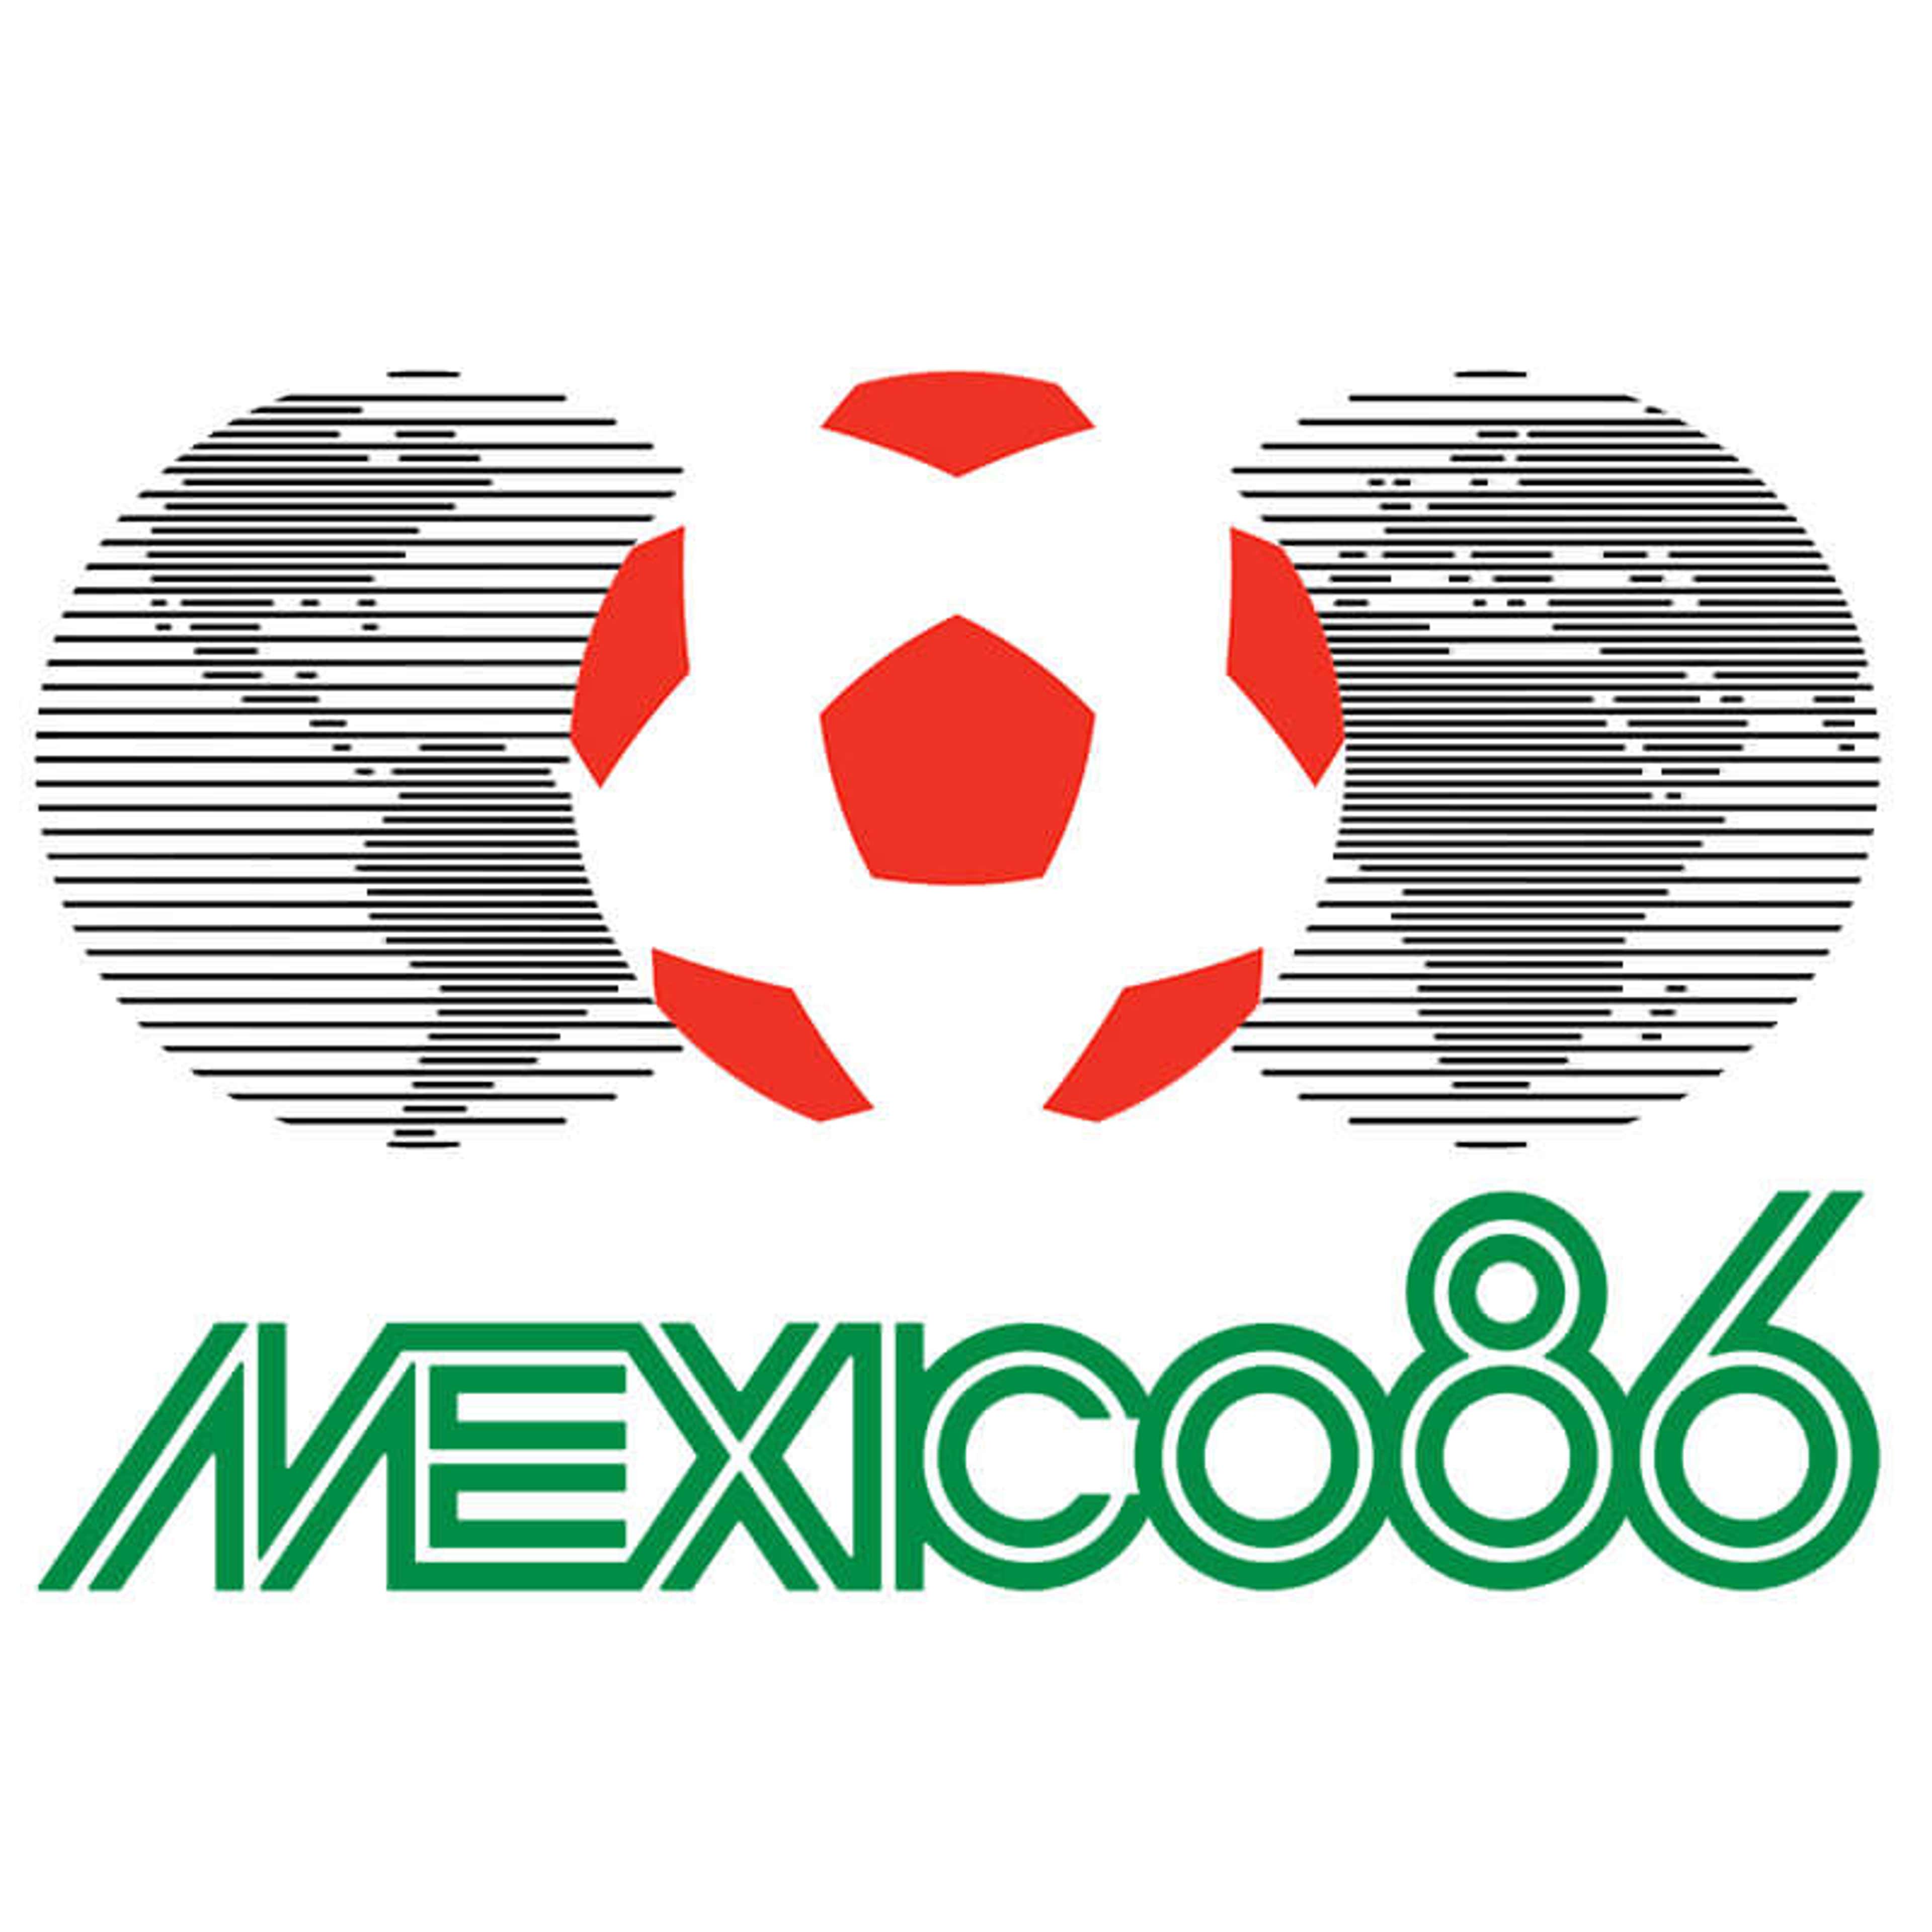 FIFA World Cup logos through the years (1954-2022)